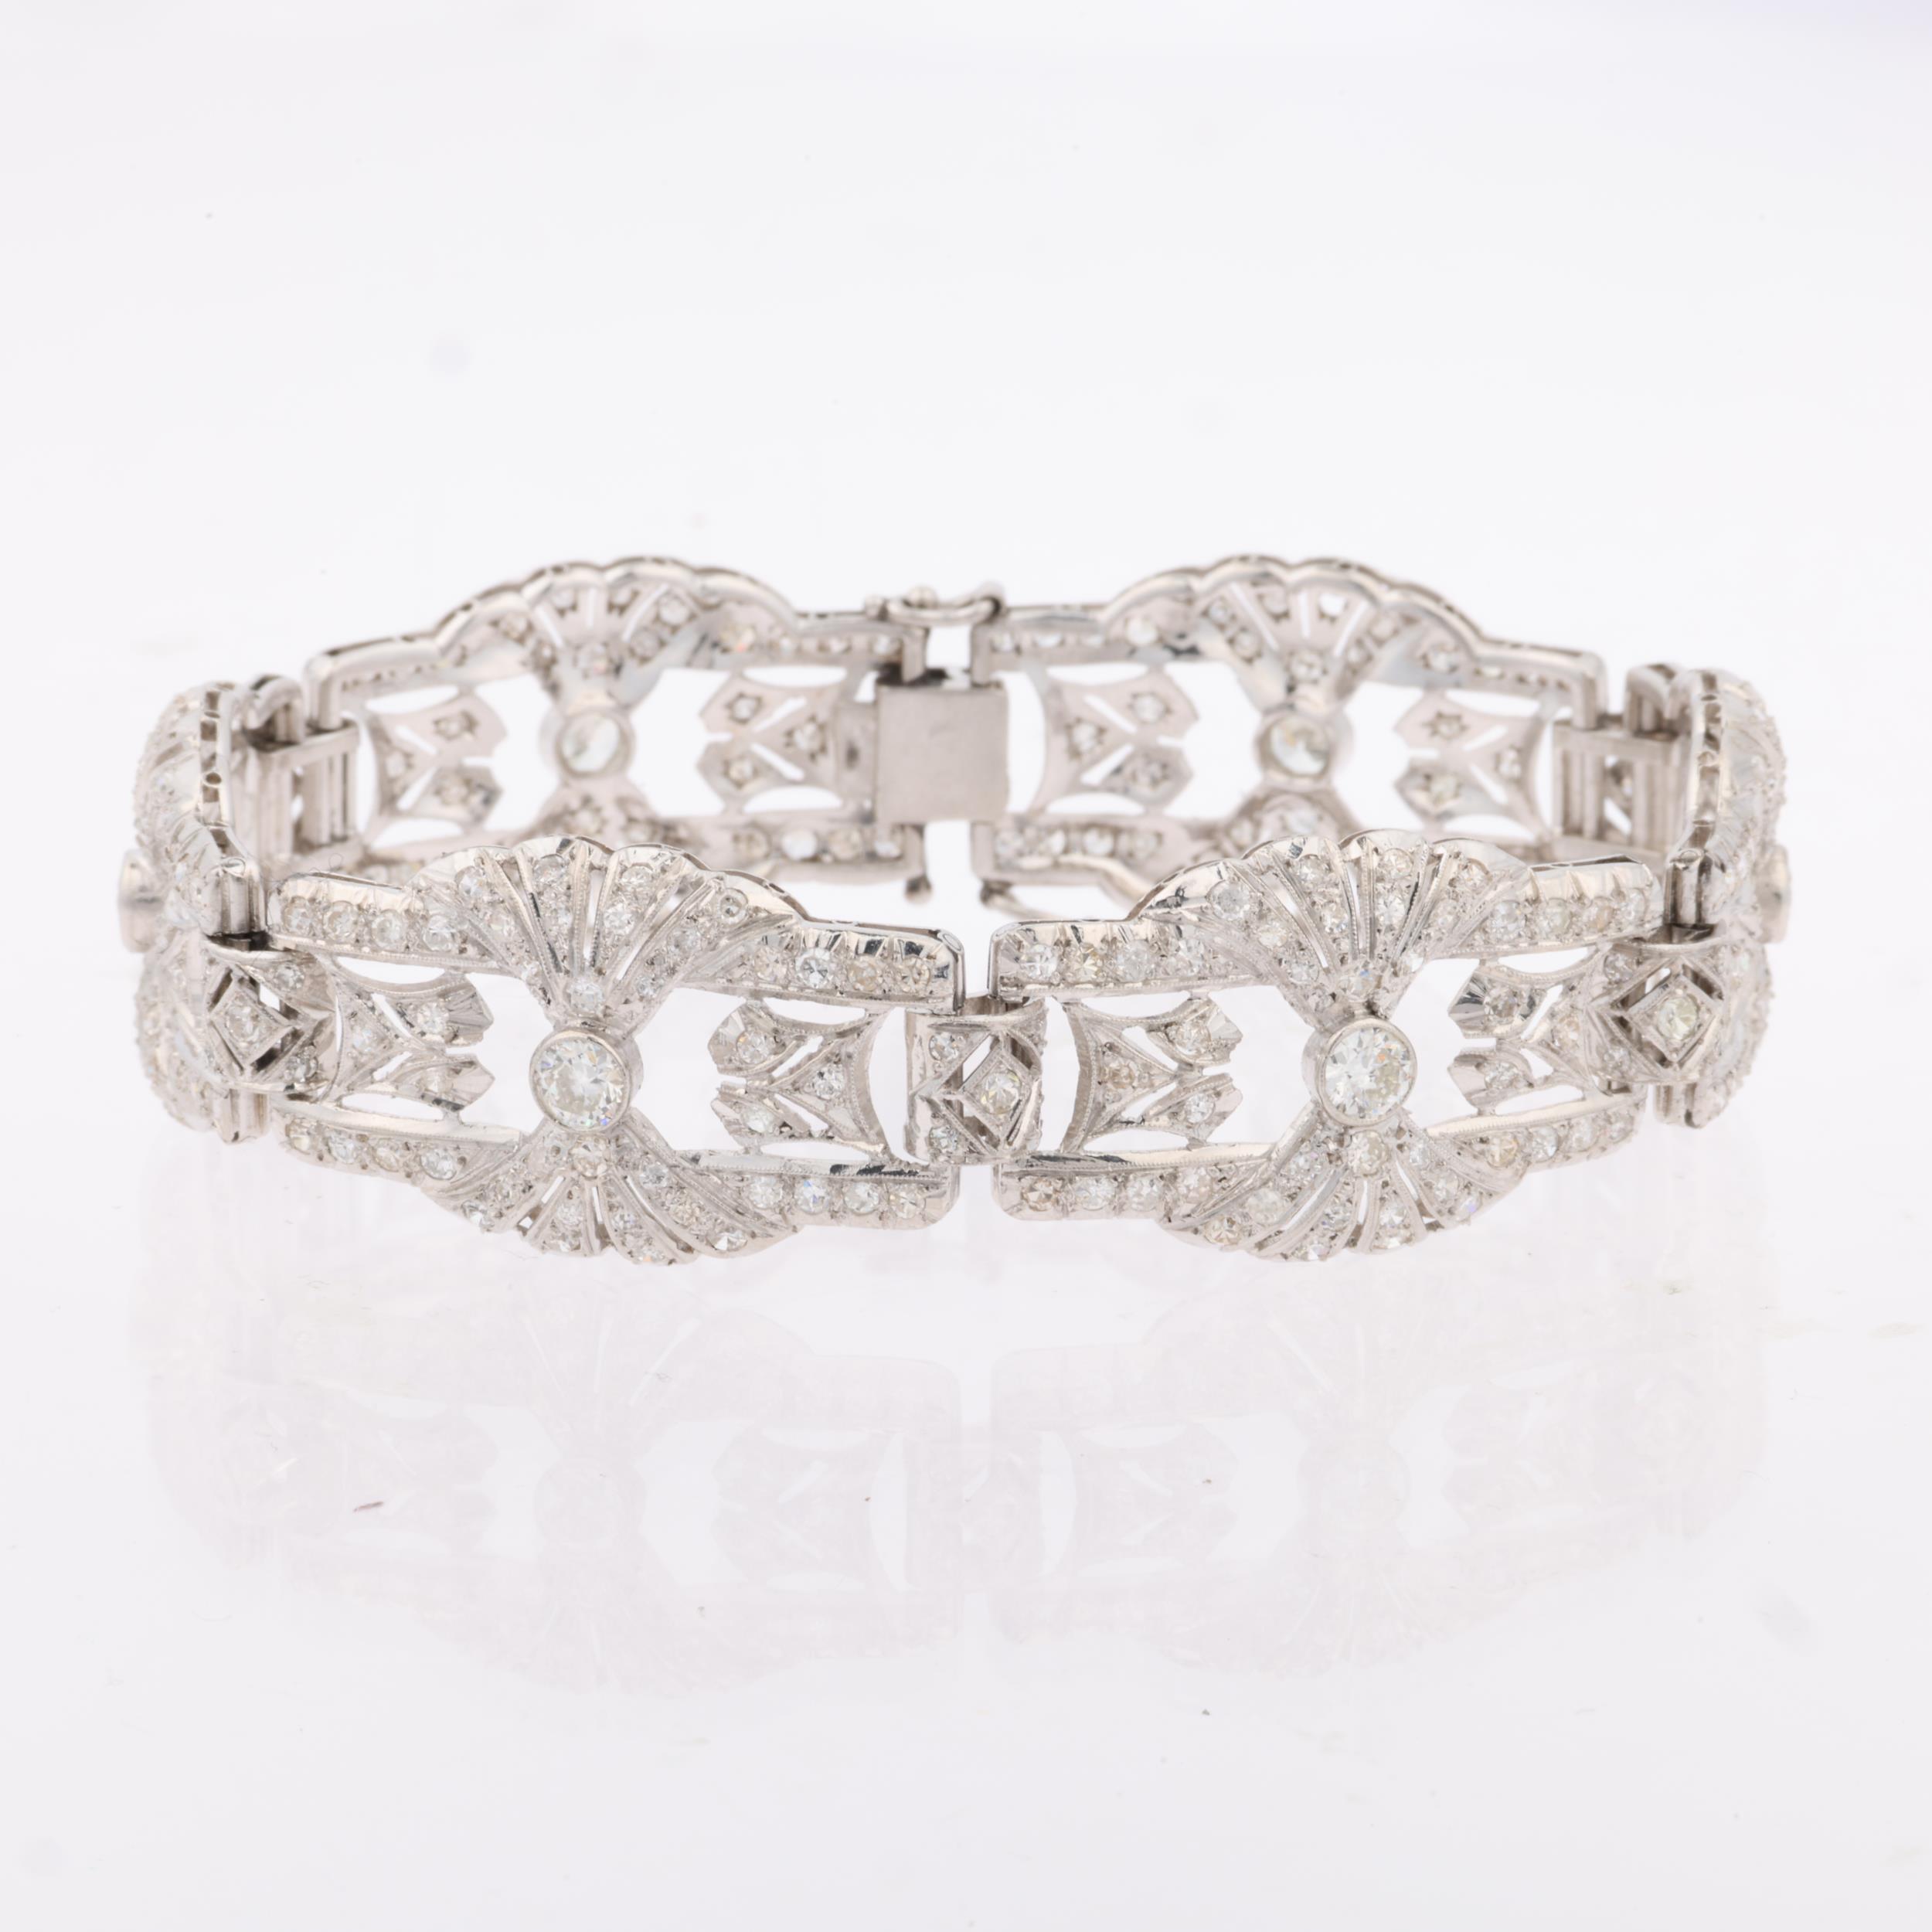 An Art Deco platinum and diamond panel bracelet, the 6 panels having openwork fan decoration and - Image 4 of 4